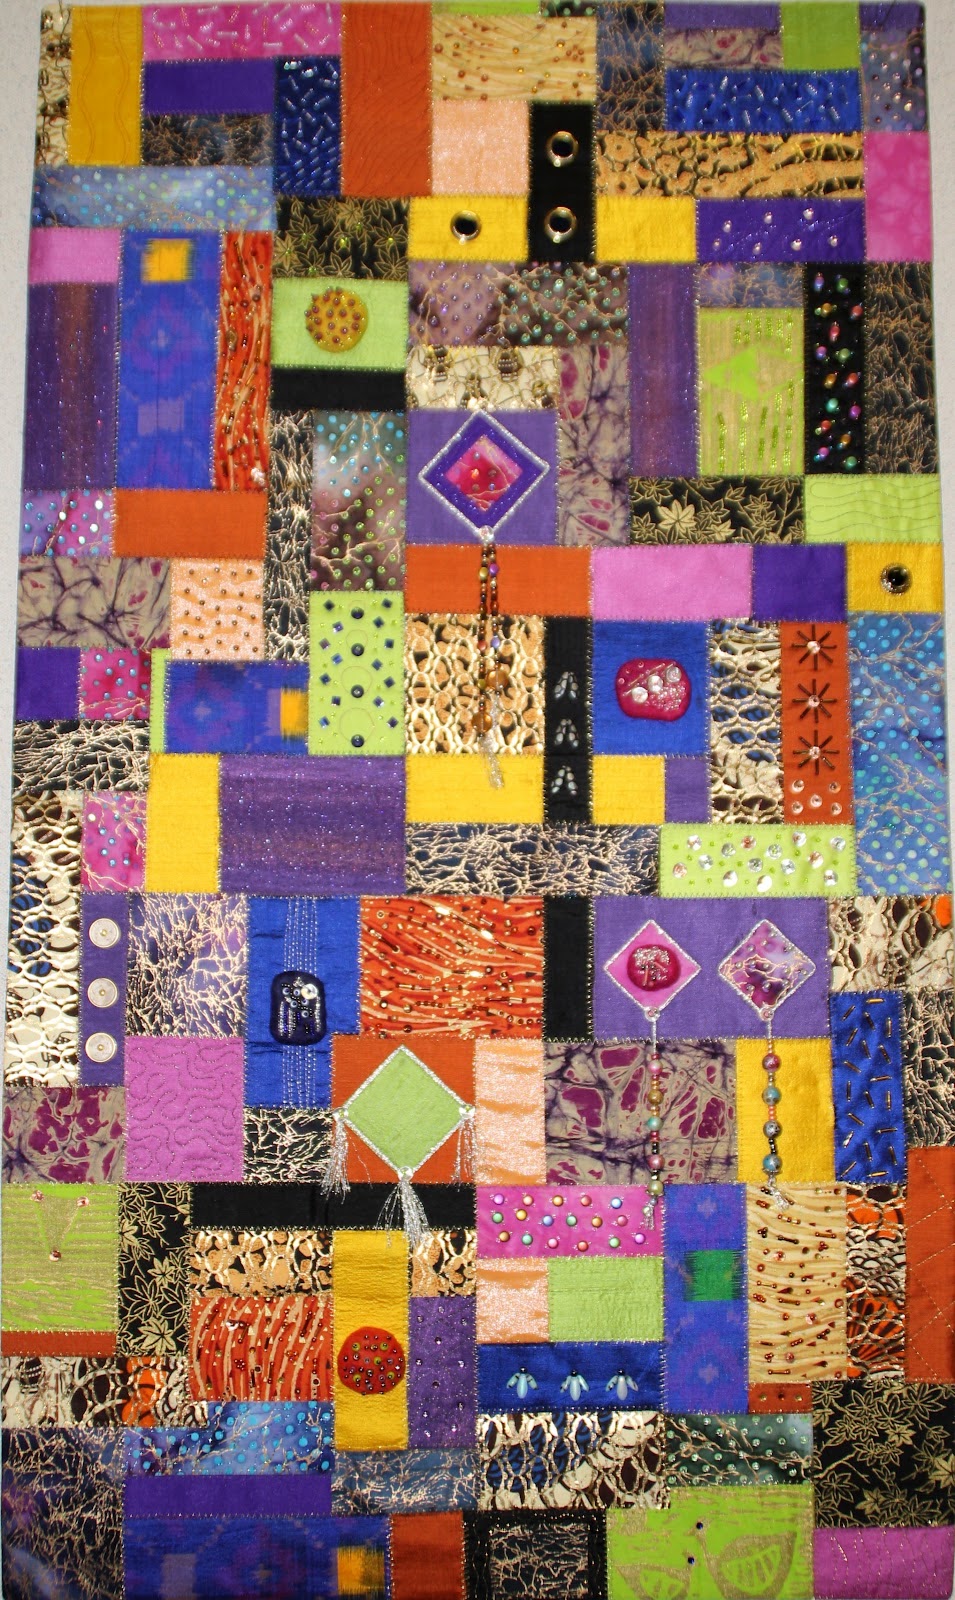 Mountain Art Quilters: On July 25, 2012 MAQ featured its Second ...